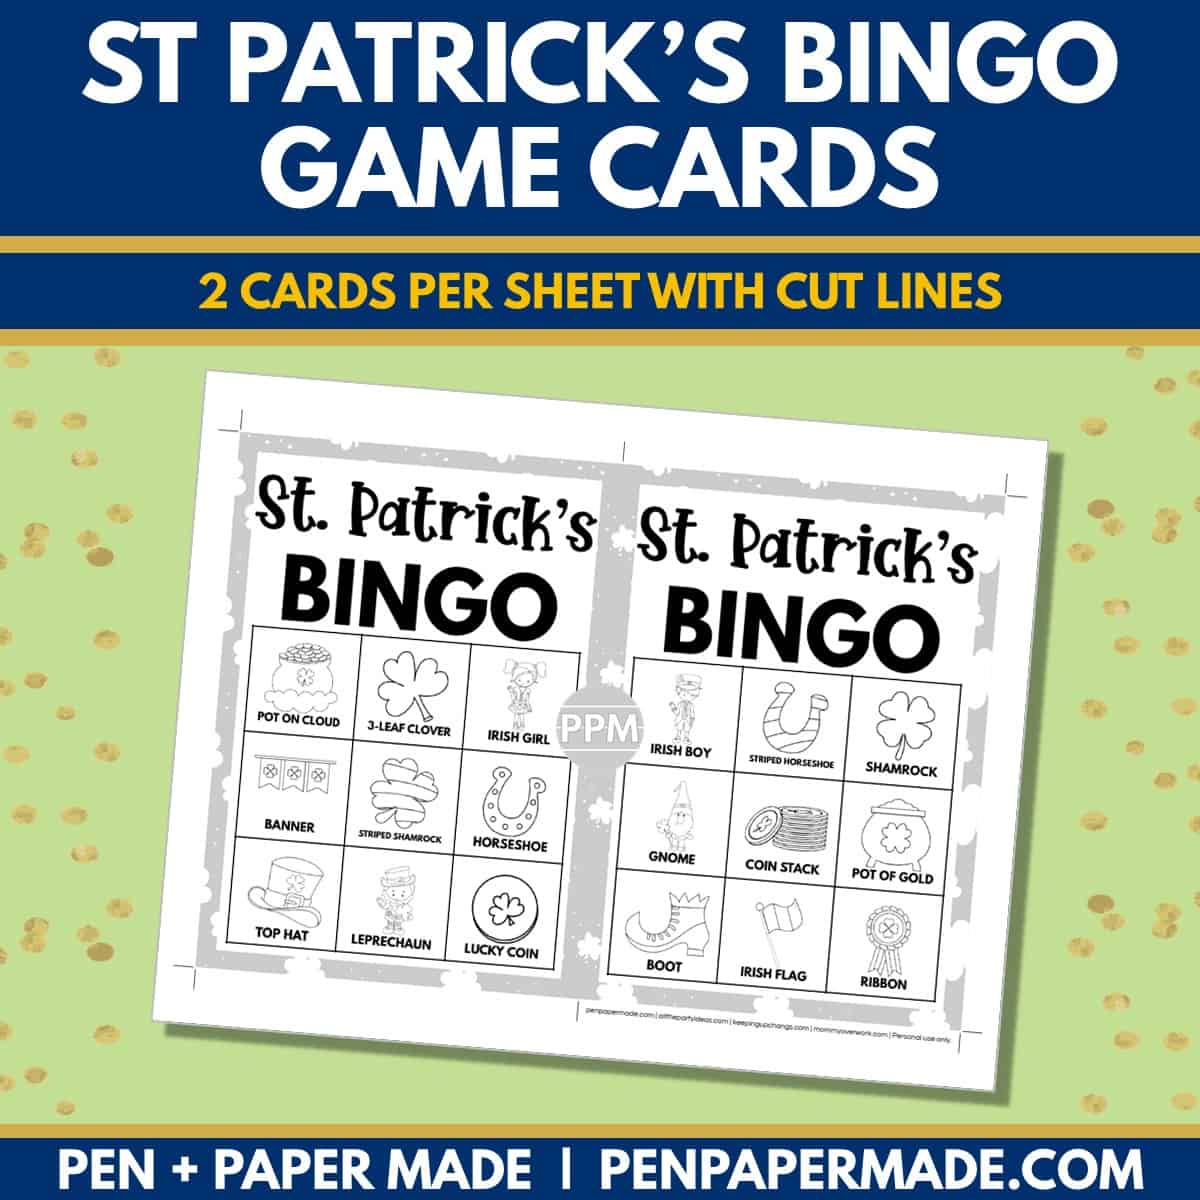 st. patrick's day bingo card 3x3 5x7 game boards with images and text words.